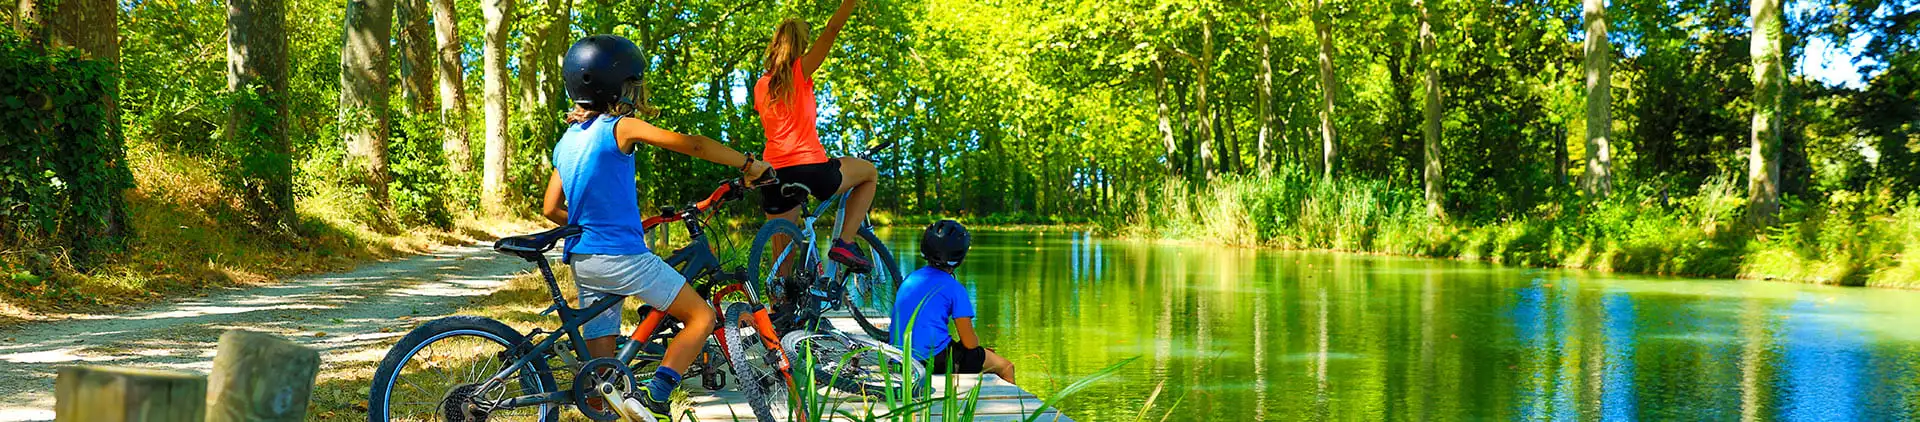 Discover the Canal du Midi by bike, starting from the campsite l'Escale Occitane in the Aude